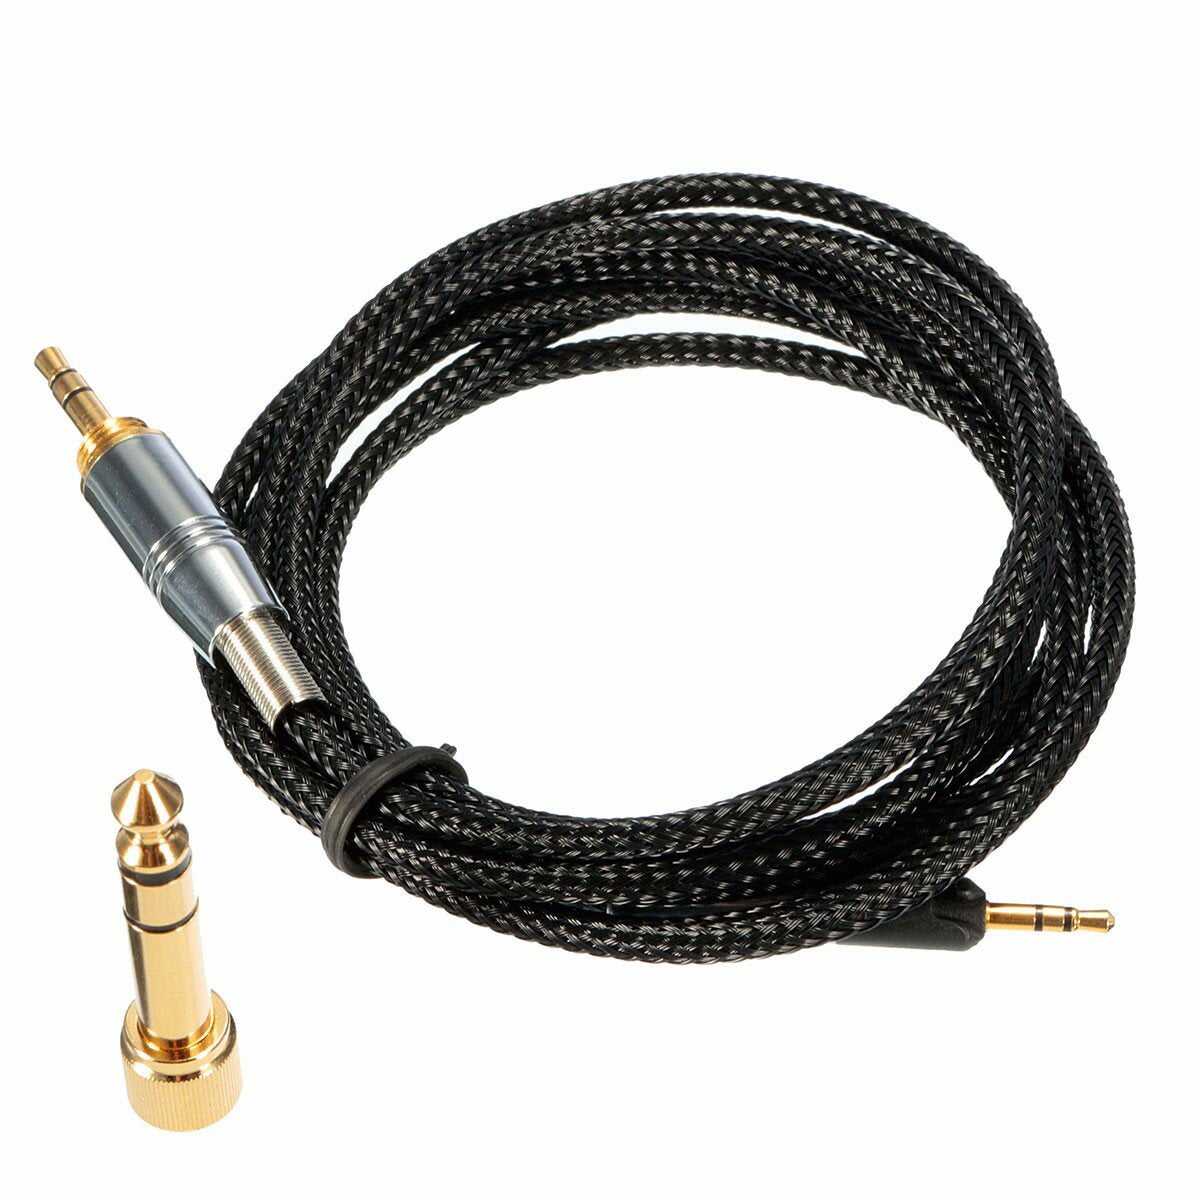 Headphones Cable 3.5mm to 6.35mm Oxygen-Free Copper Audio Cable 2.5mm Plug for ATH-M50x ATH-M40x ATH-M70x